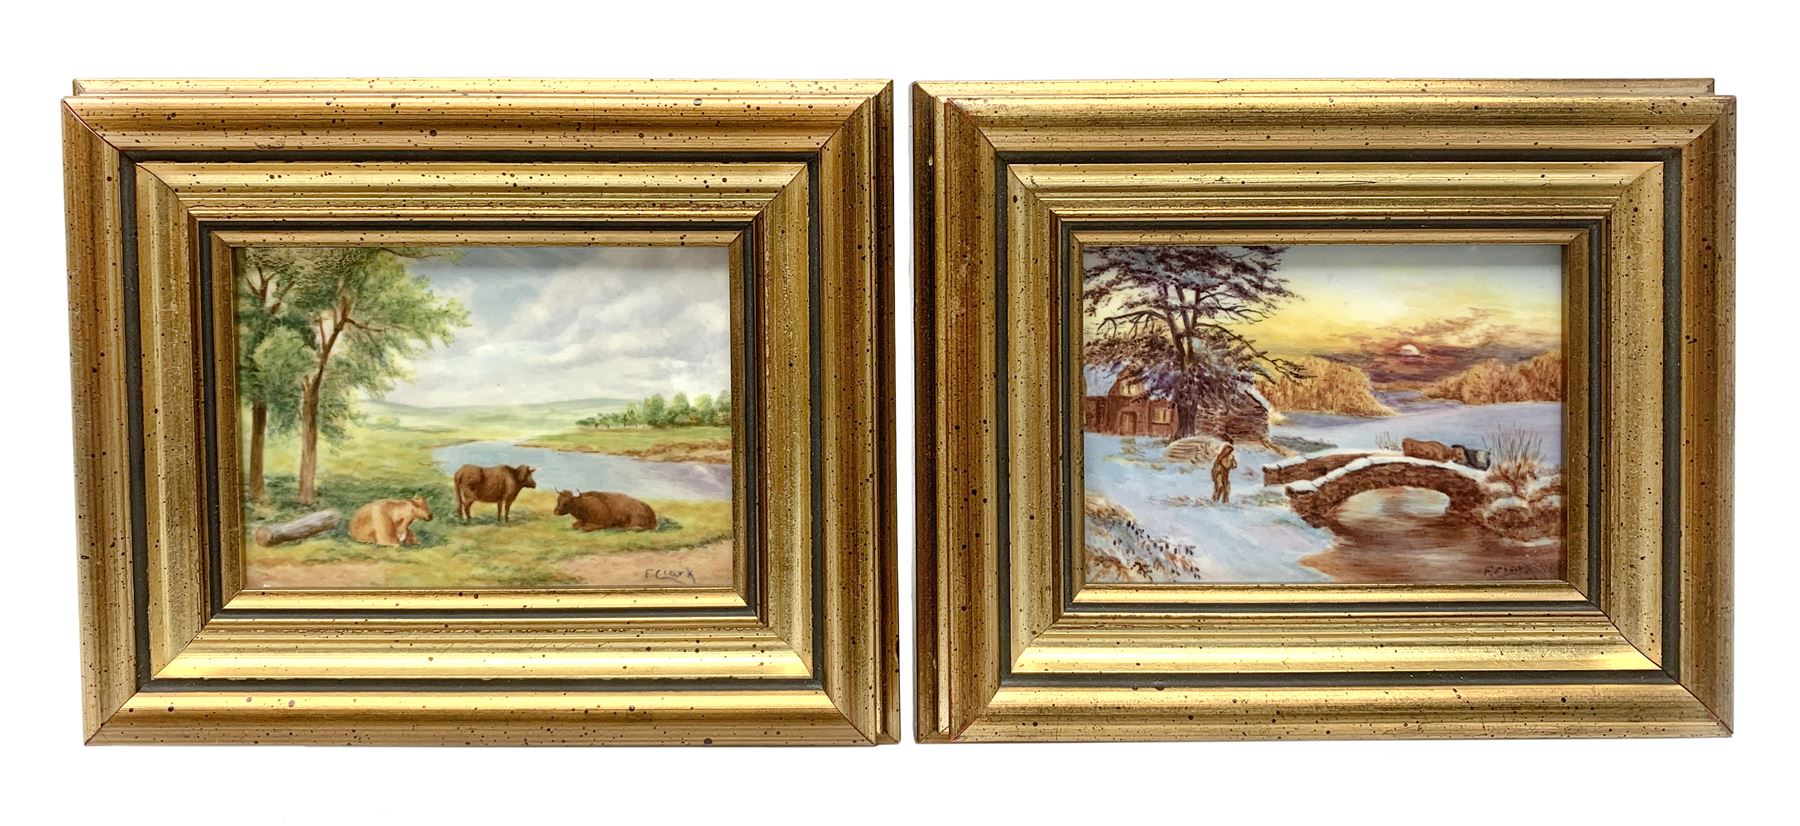 Pair of framed painted porcelain plaques